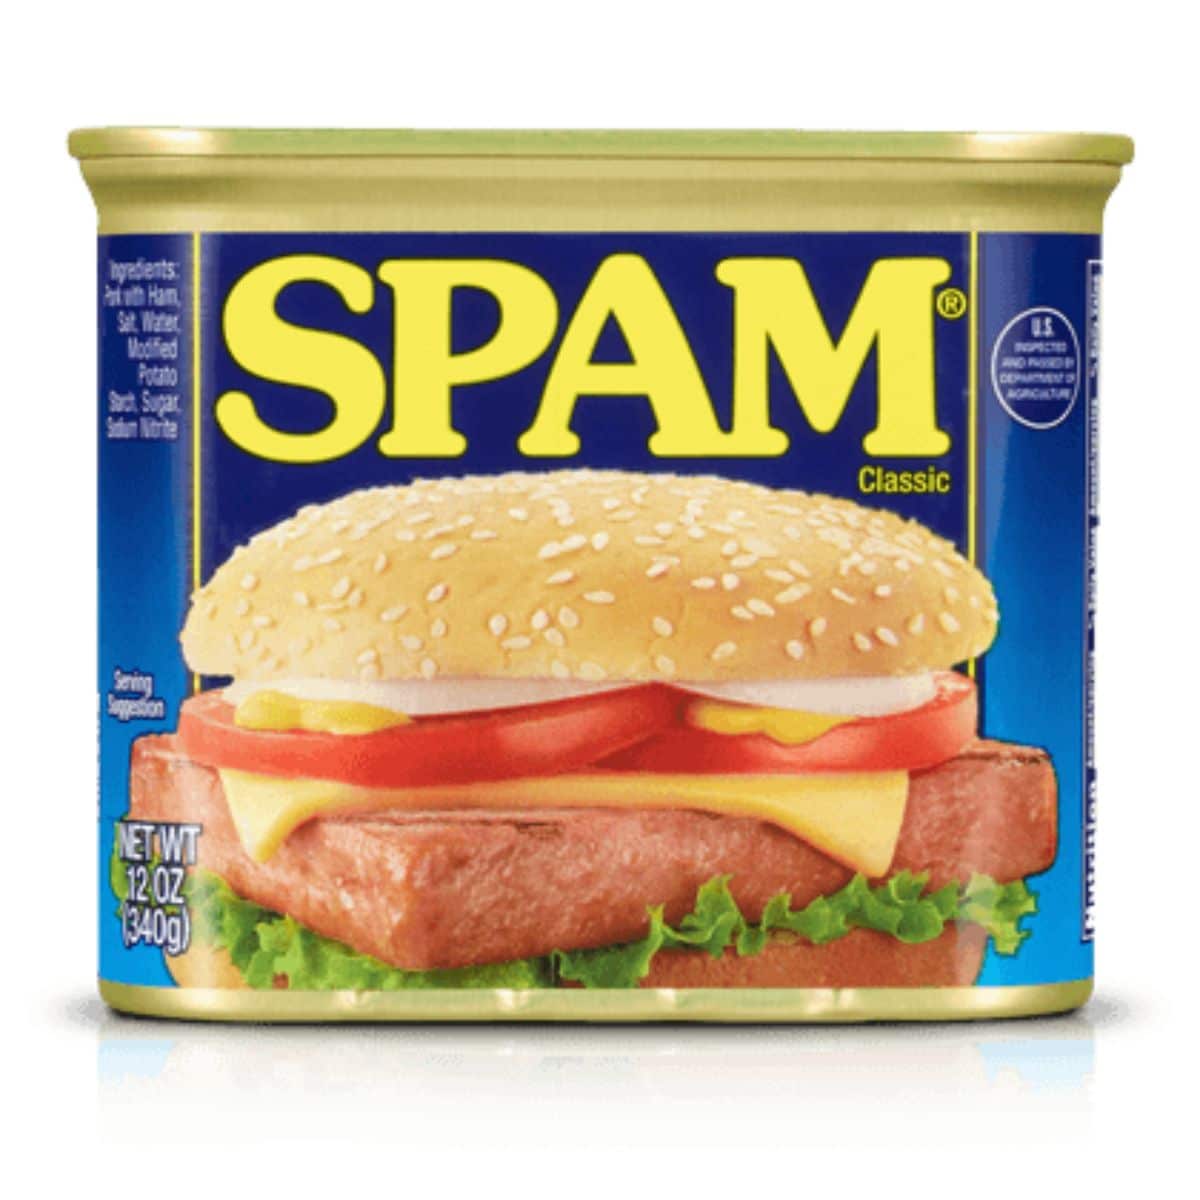 a can of spam.